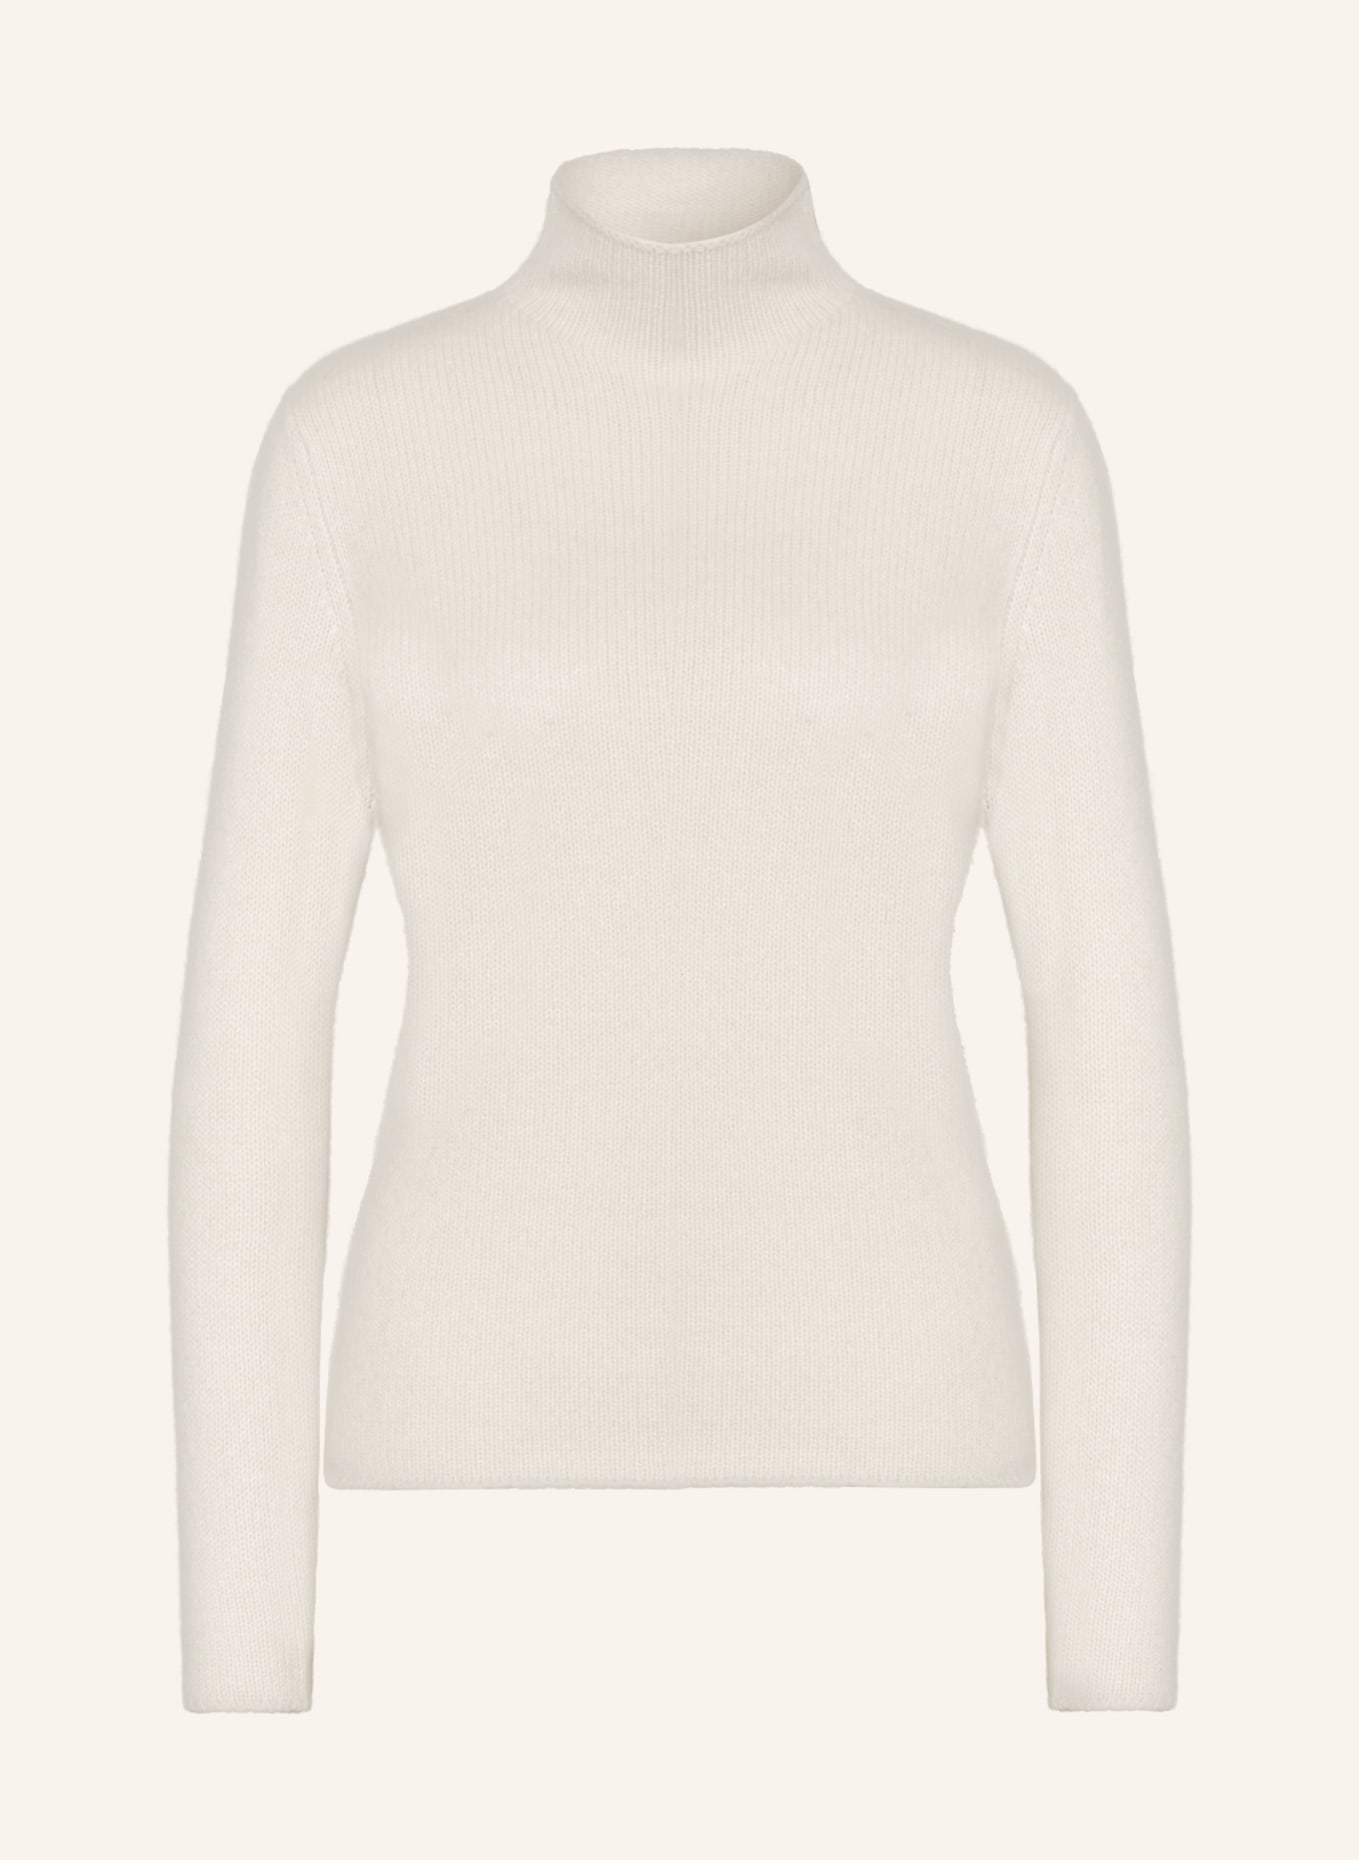 darling harbour Cashmere-Pullover, Farbe: WEISS (Bild 1)